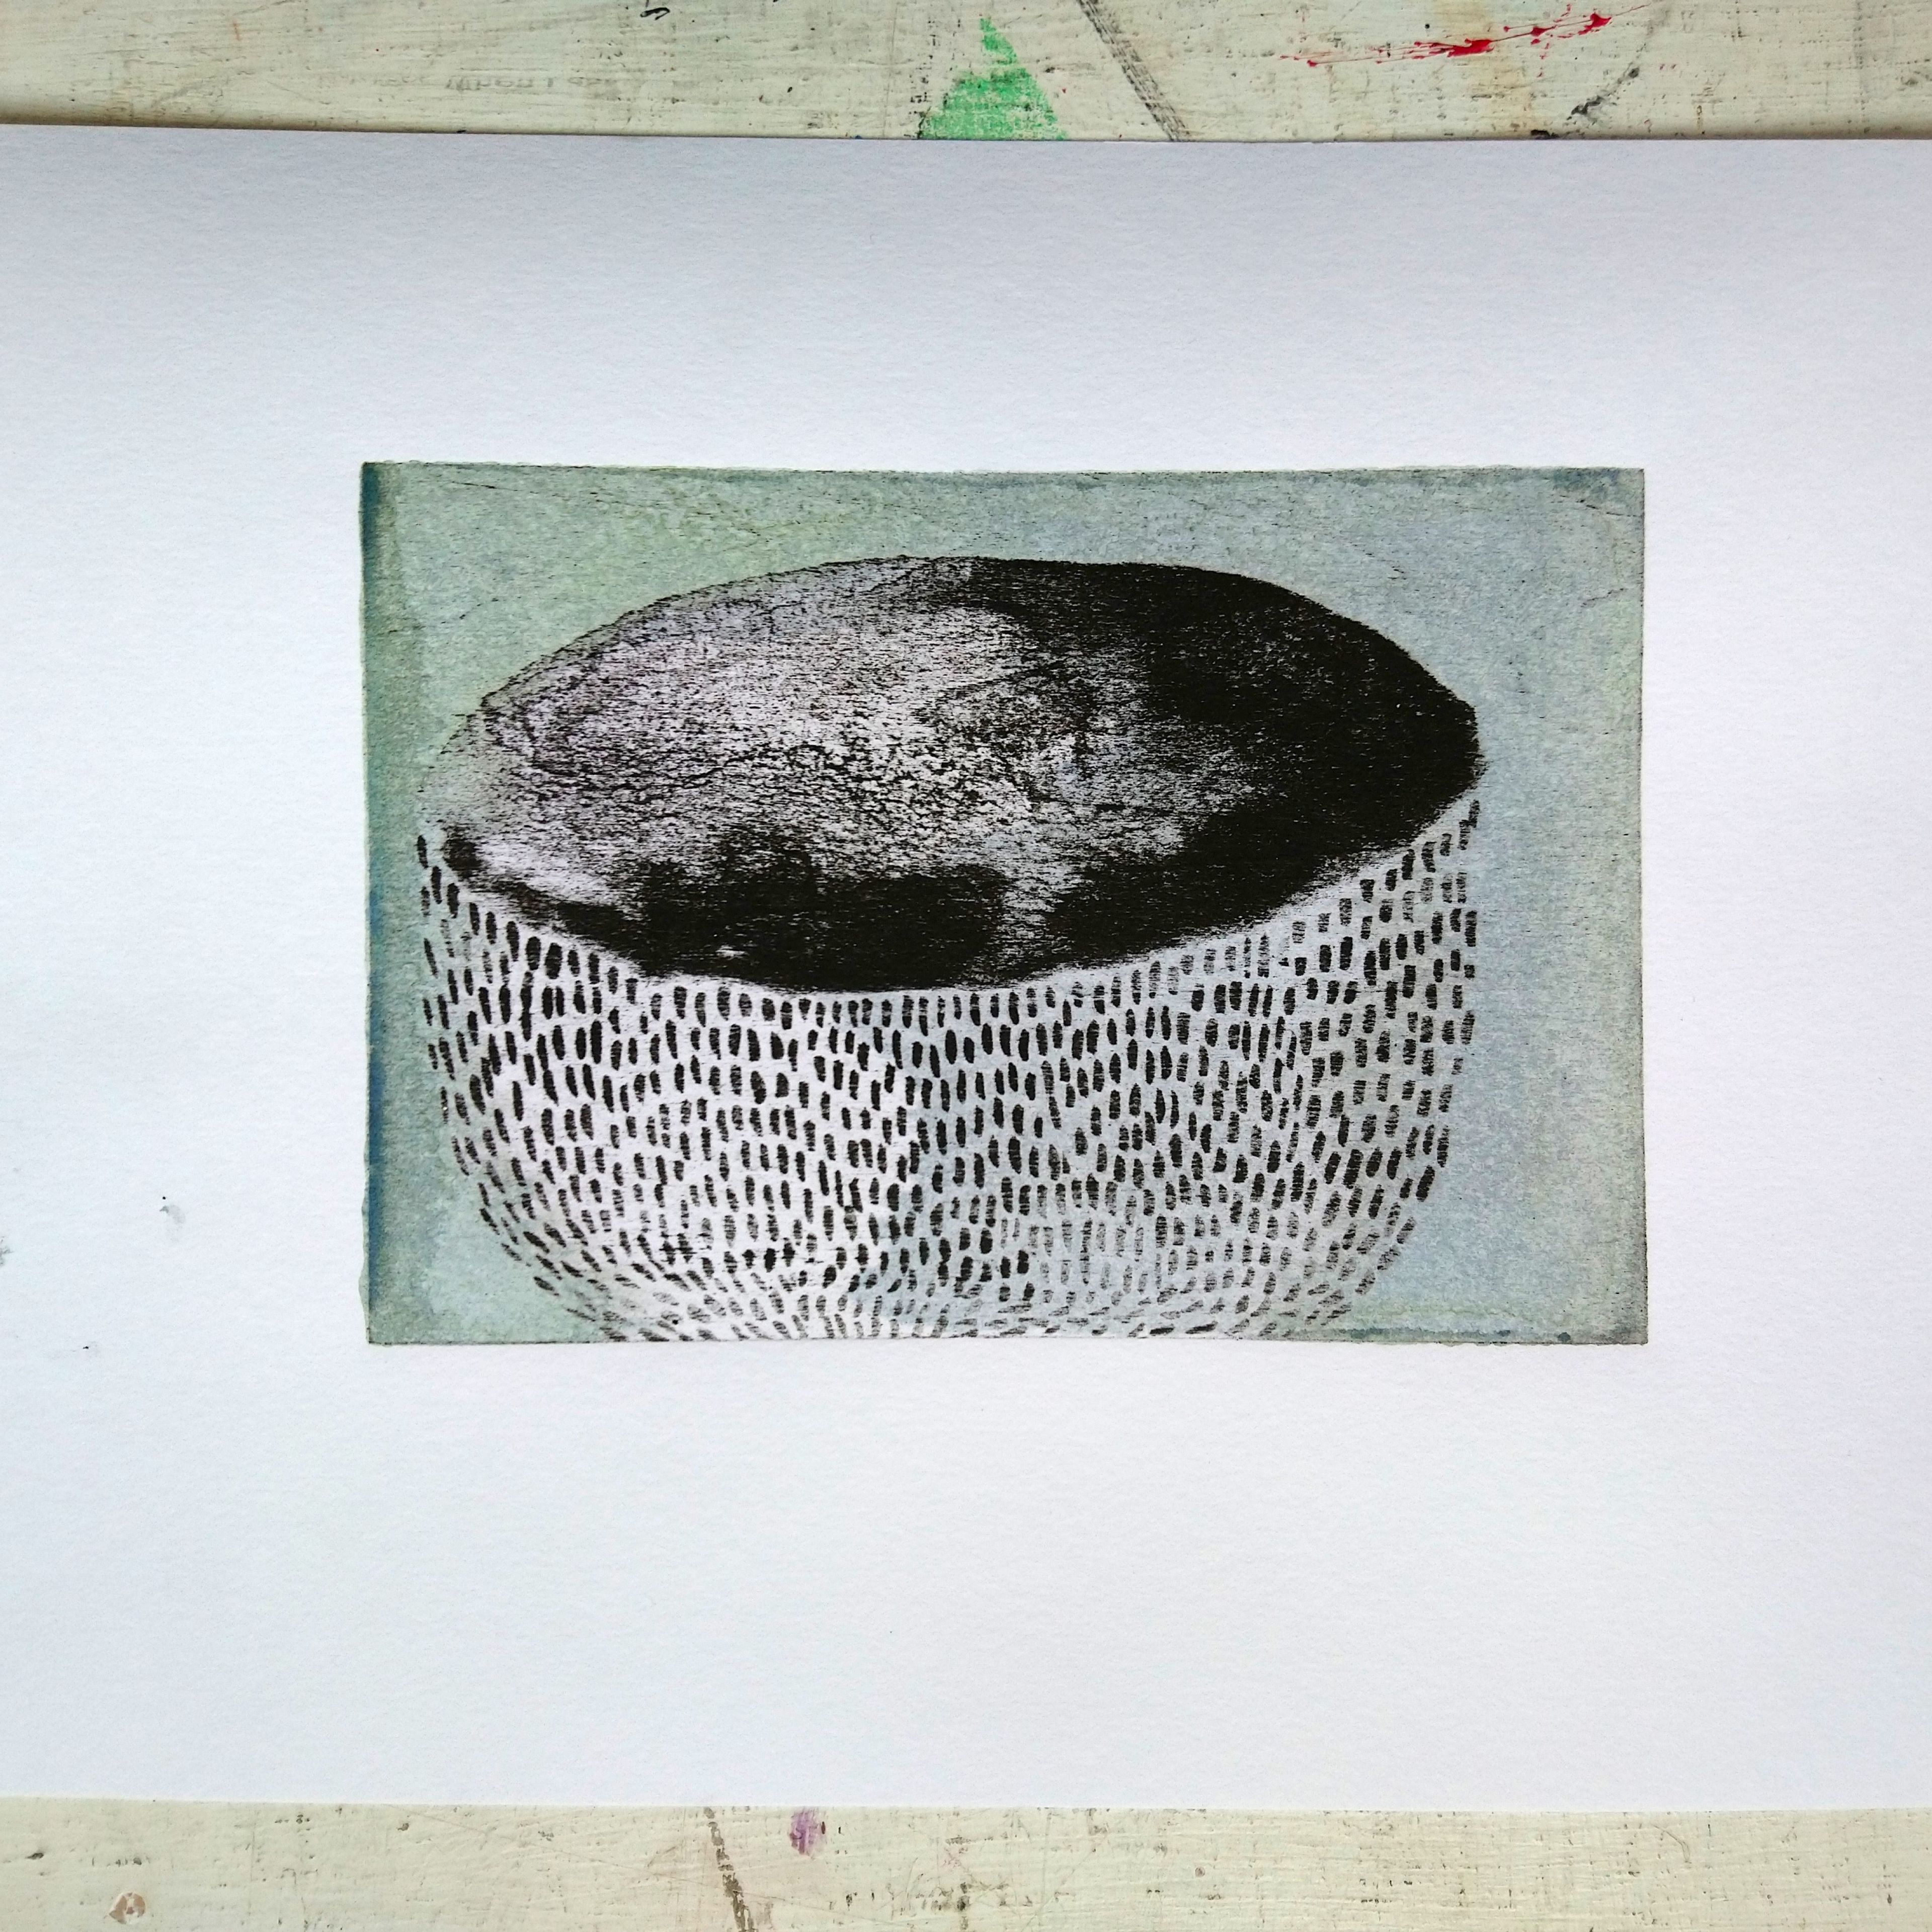 lithography print; black and white textured archaeological bowl against muted green background